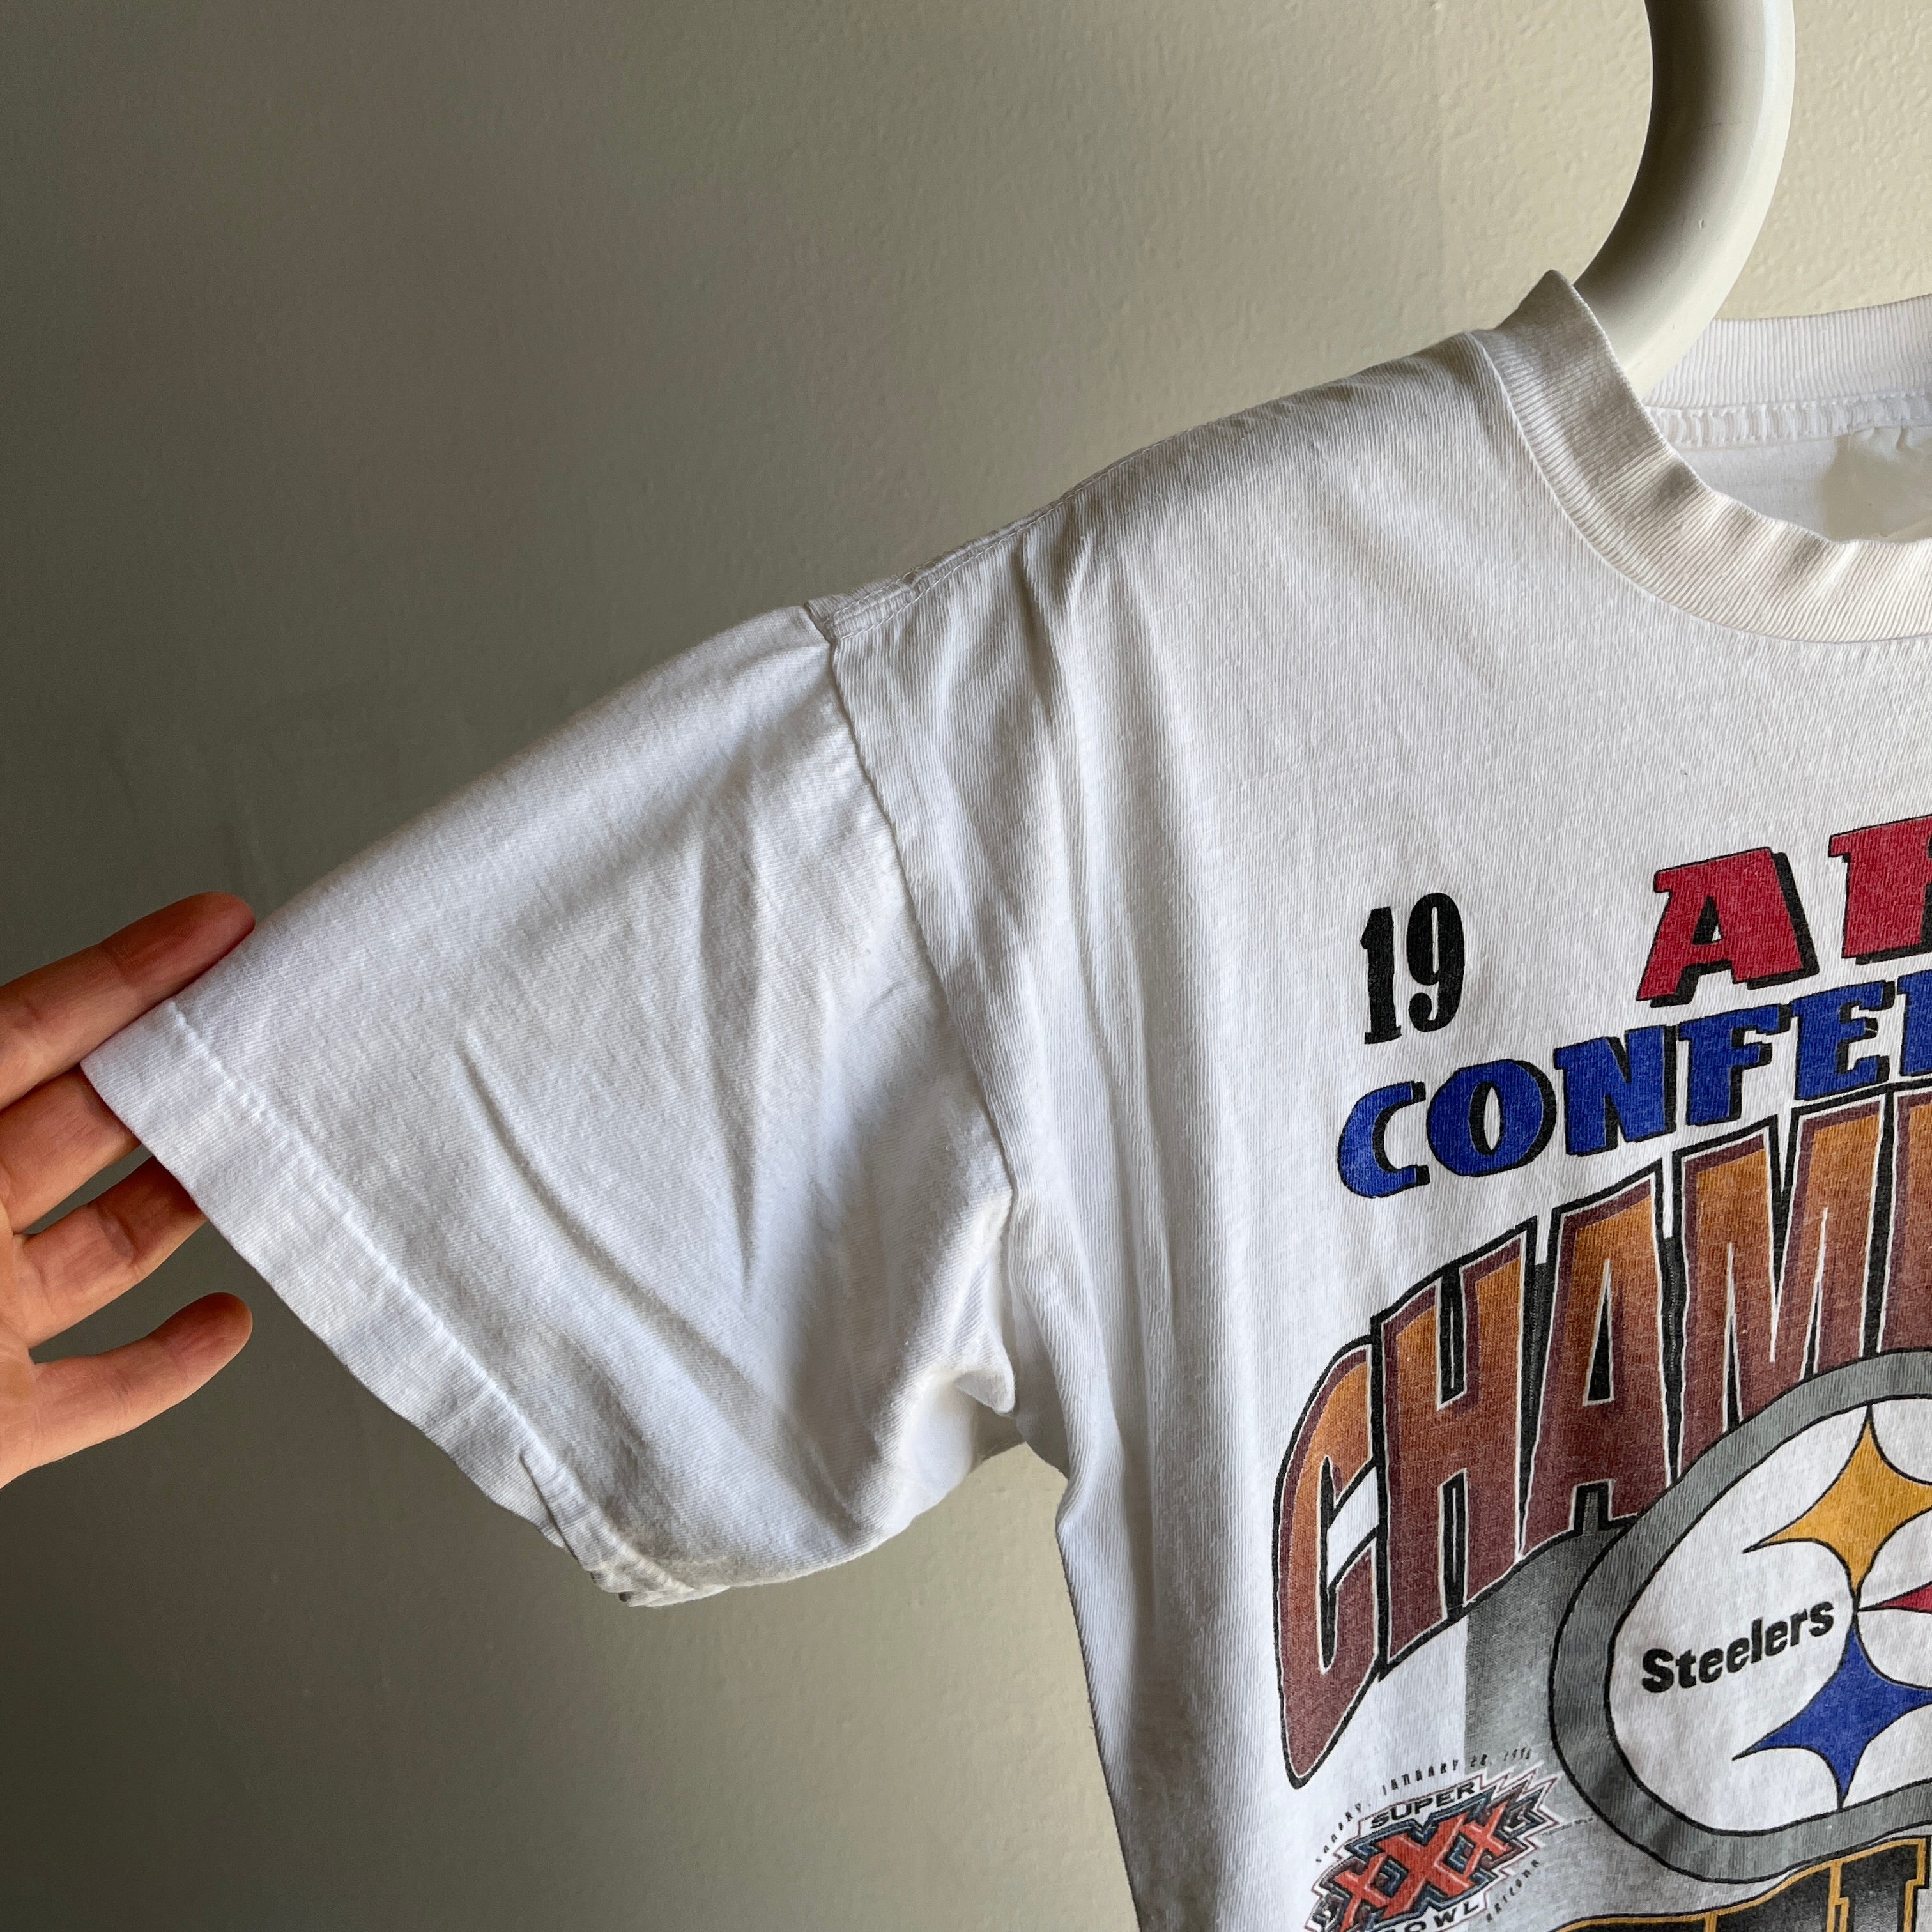 1995 AFC Champions - Pittsburgh Steelers - T-Shirt